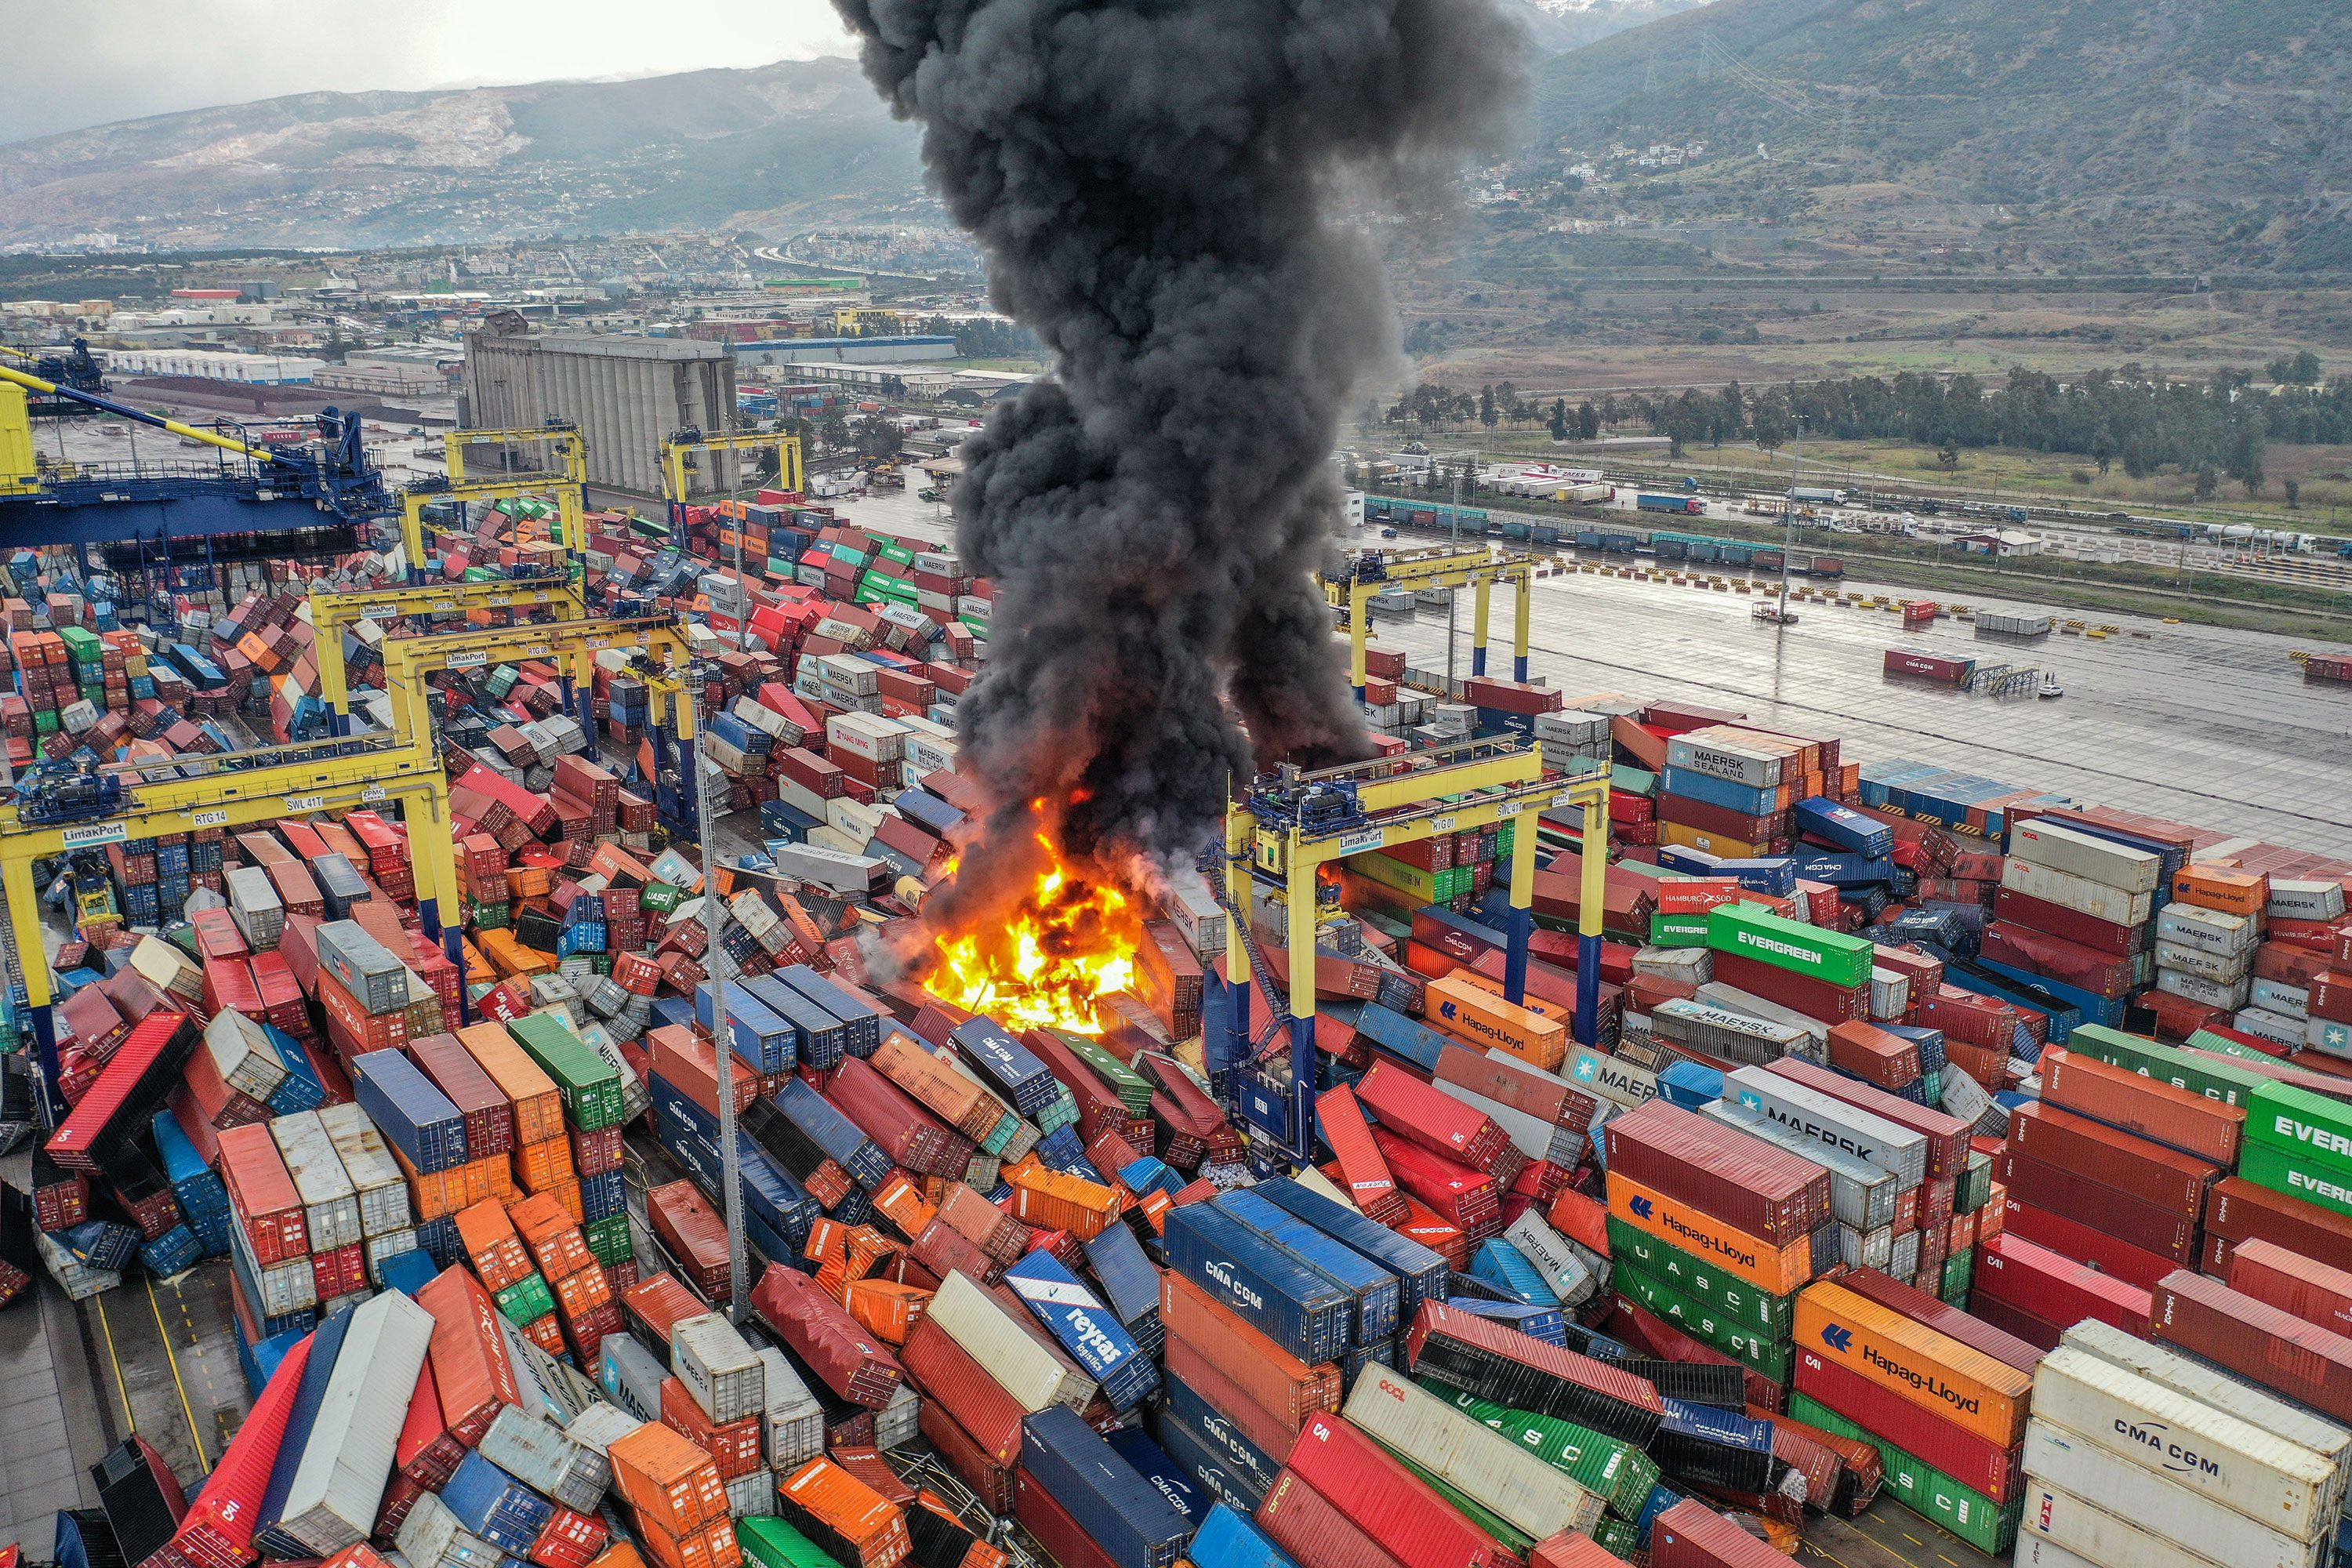 The fire burns among flipped-over containers on Monday morning, hours after the earthquake struck.